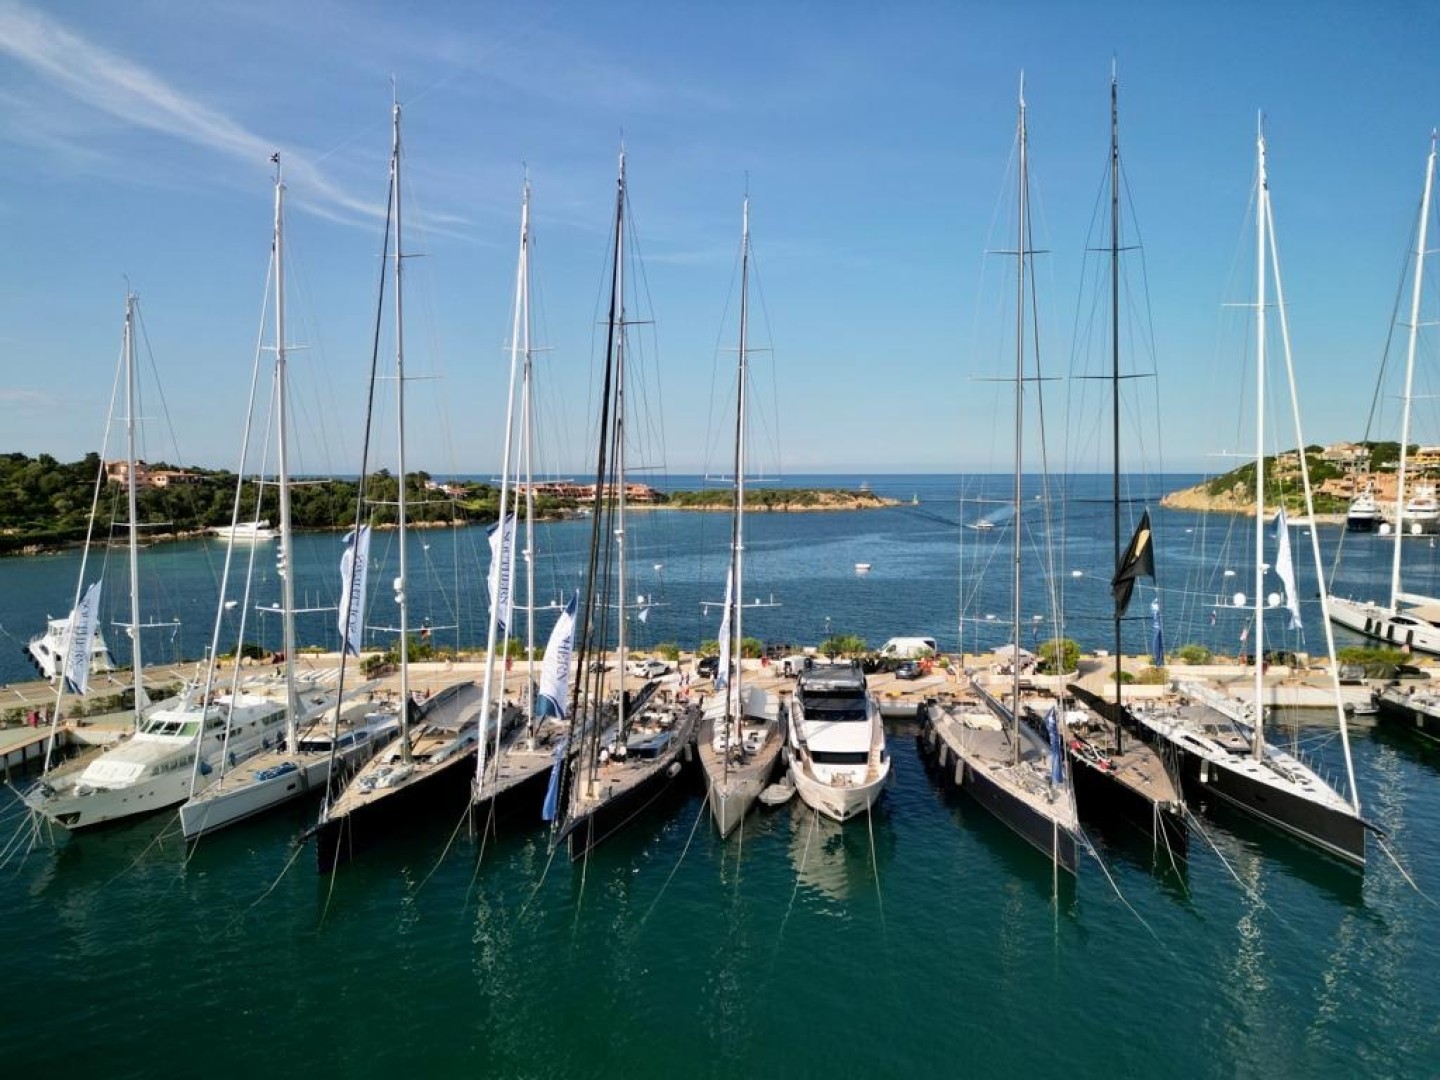 The “Southern Wind Rendezvous” is about to begin in Porto Cervo